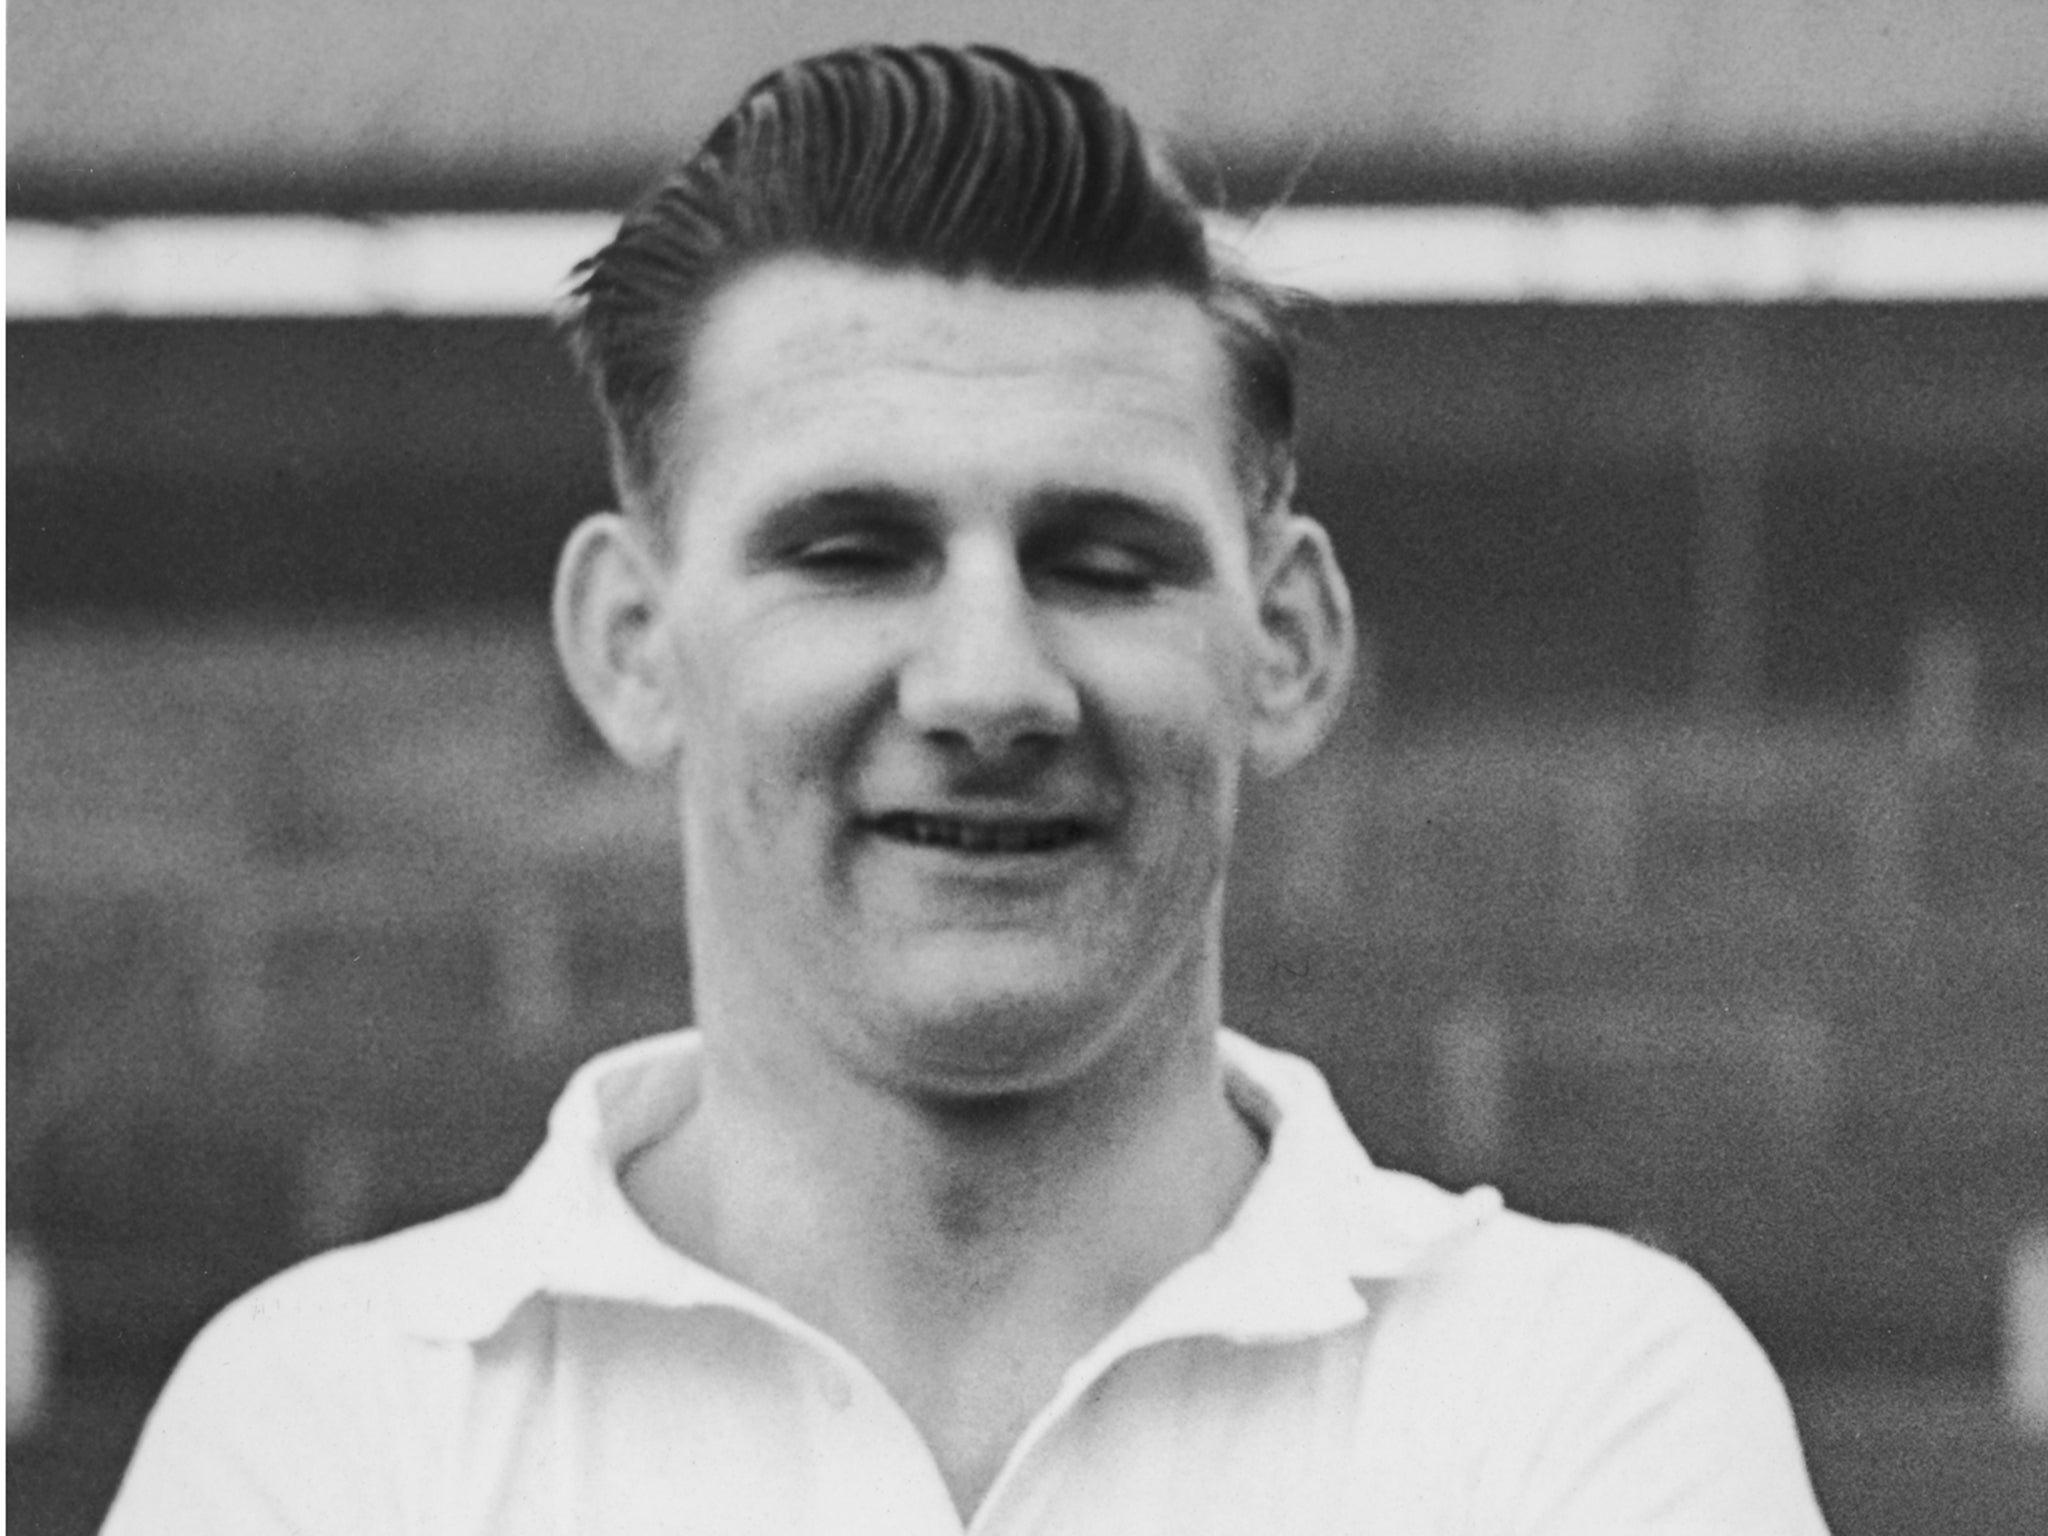 Marston: he came fourth in a fans’ poll to determine Preston’s greatest ever player